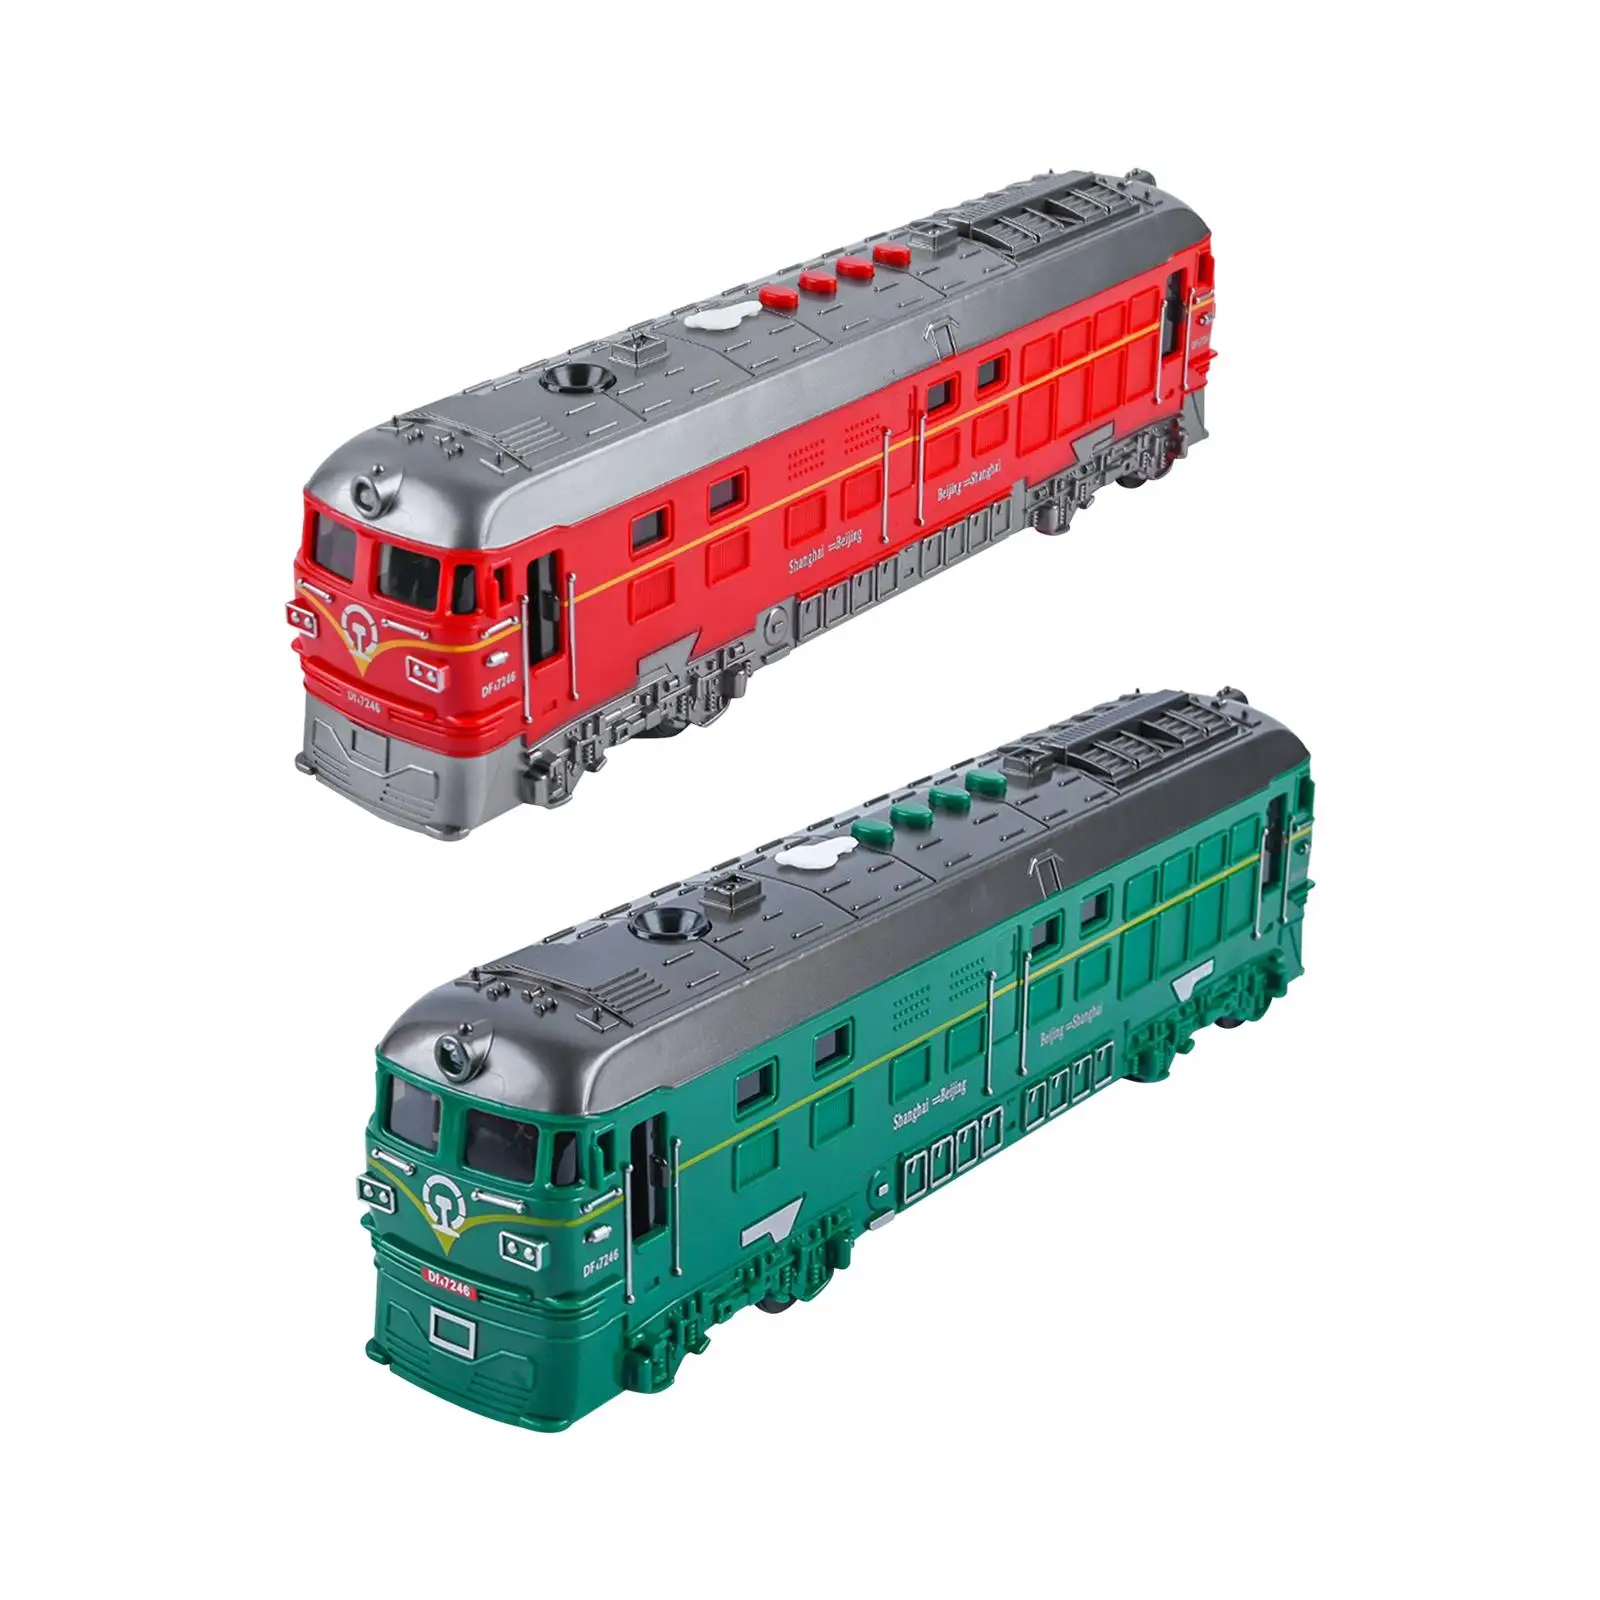 

Electric Model Trains W/steam and light & Sounds Educational Retro Train Toy for Gift Ages 3 4 5 6 7+ Years Old Kids Children